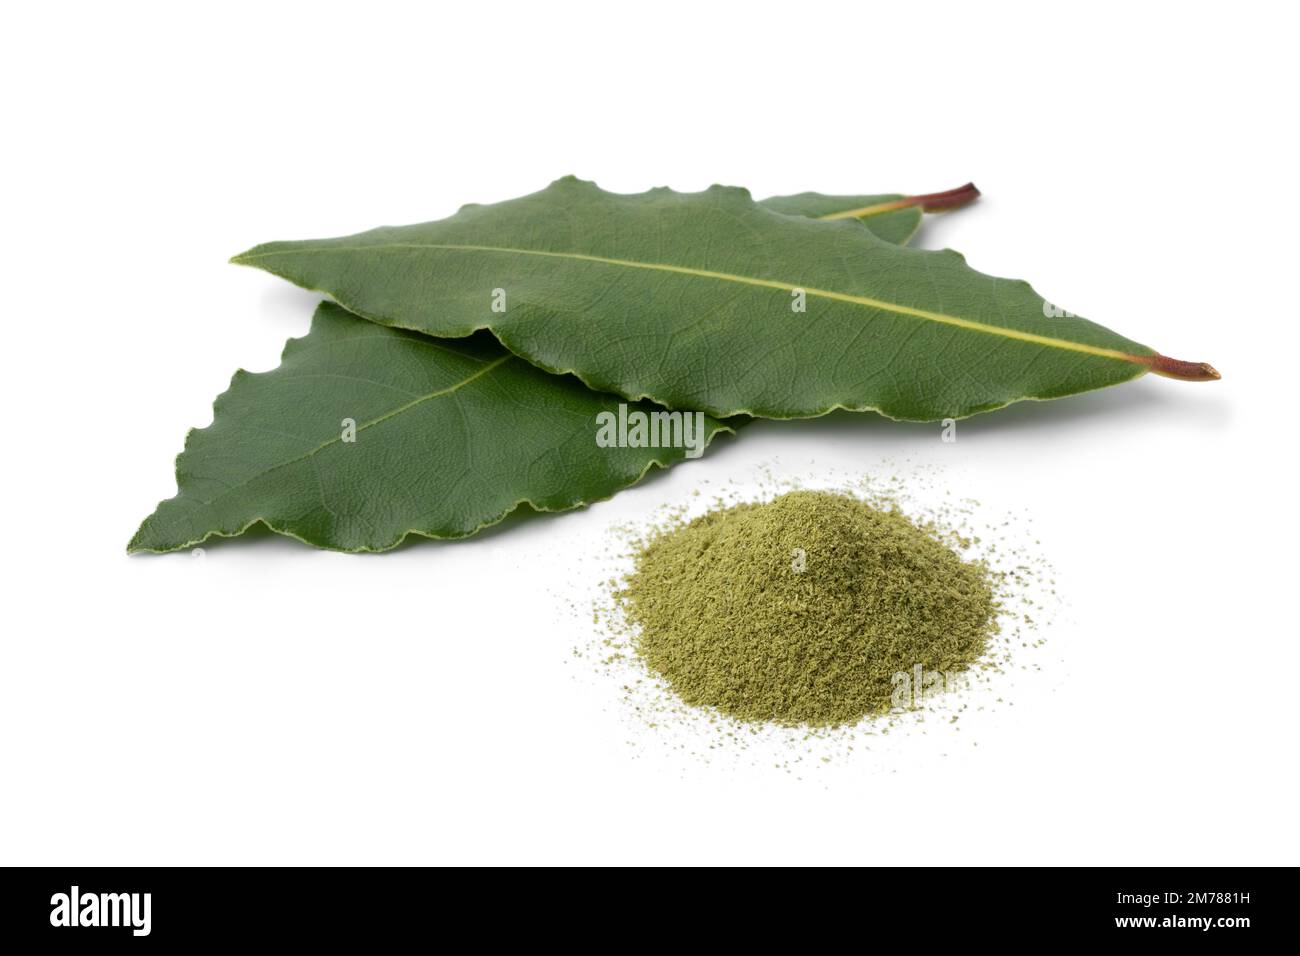 Pair of fresh bay leaves and a heap of bay leaf powder close up on white background Stock Photo